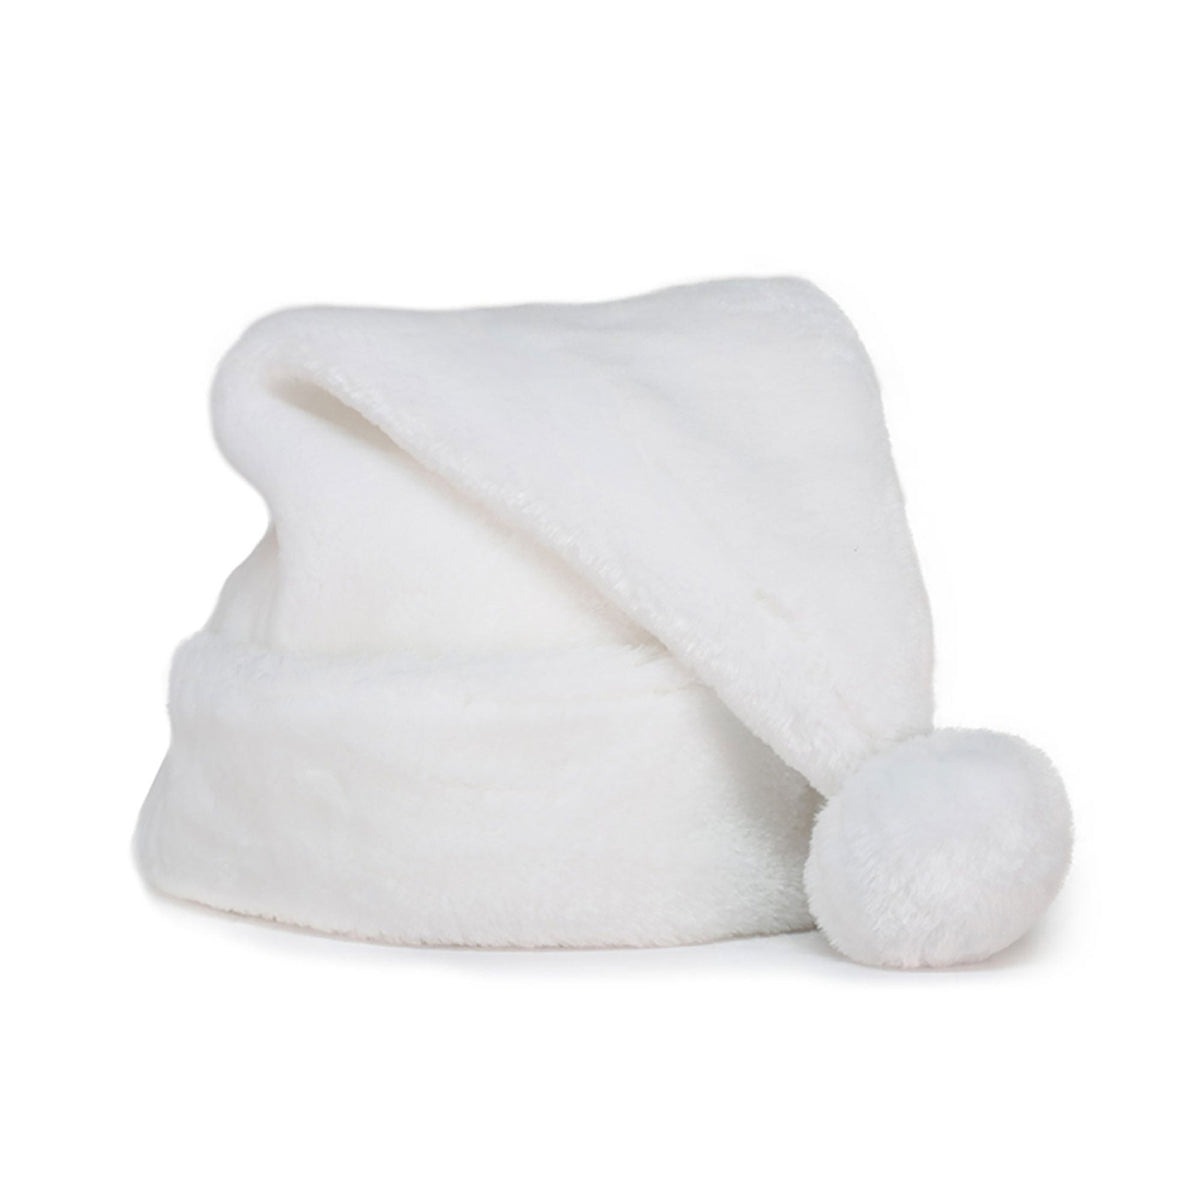 DANSON DECOR Christmas White Plush Hat with Cuff, 17 Inches, 1 Count 062615987022